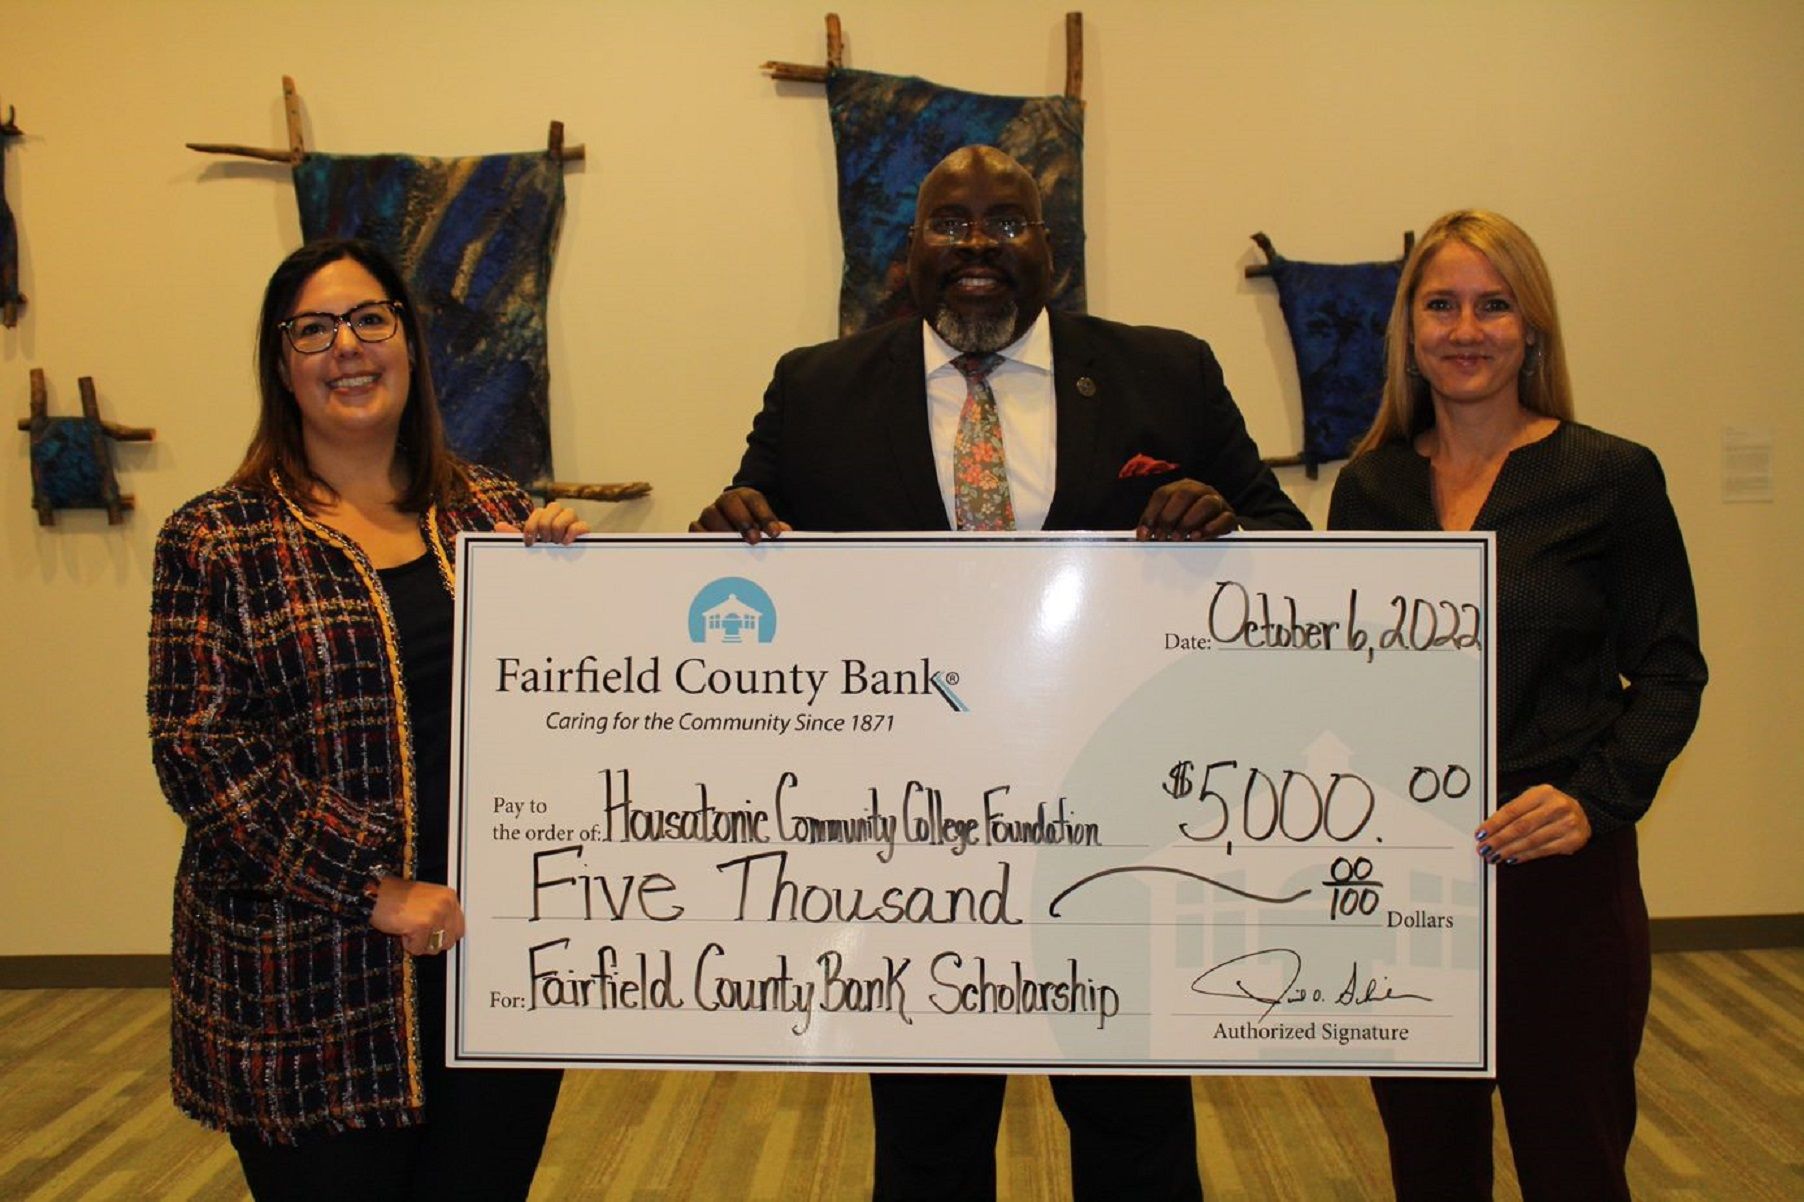 Left to right: Jennifer Cutrali, Fairfield County Bank VP, Credit Administration Manager and HCC Foundation Board Member, HCC CEO Dr. Dwayne Smith and HCC Foundation Executive Director Kristy Jelenik.